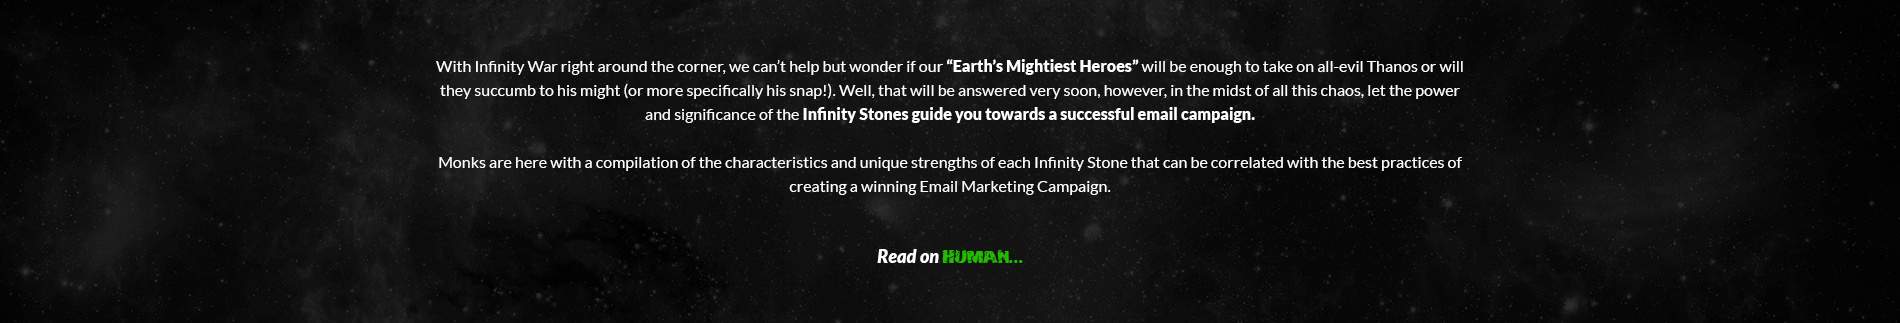 With Infinity war right around the corner, we can’t help but wonder if our “Earth’s Mightiest Heroes” will be enough to take on all-evil Thanos or will they succumb to his might (or more specifically his snap!). Well, that will be answered very soon, however, in the midst of all this chaos, let the power and significance of the Infinity Stones guide you towards a successful email campaign. Uplers are here with a compilation of the characteristics and unique strengths of each Infinity Stone that can be correlated with the best practices of creating a winning Email Marketing Campaign. Read on Human…